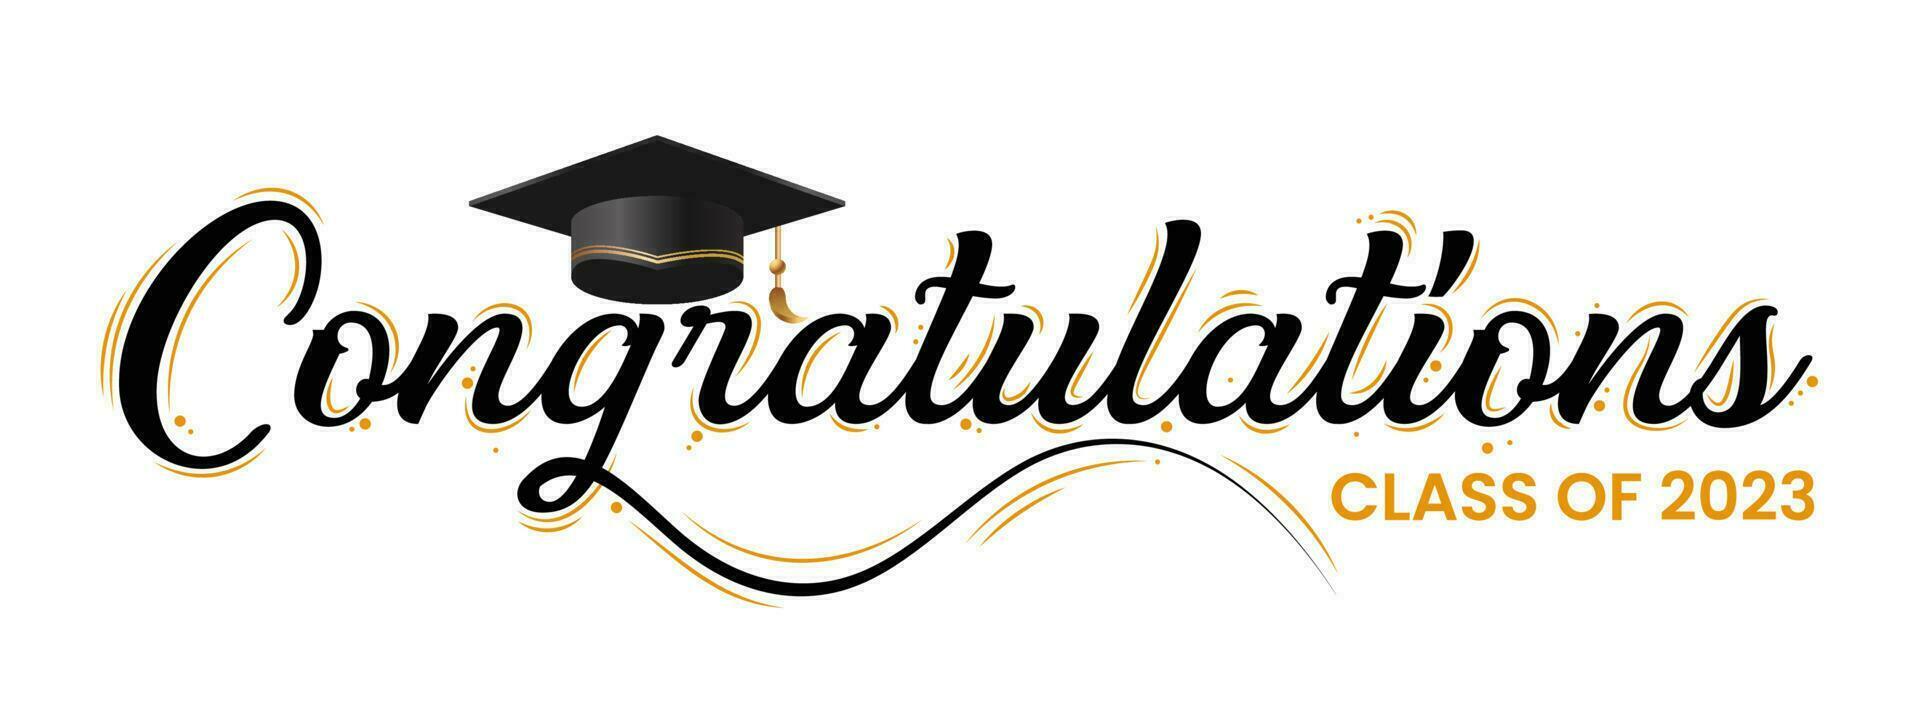 Congratulations greeting sign. Congrats Graduated. Congratulations Class of 2023. Congratulating banner. Isolated vector text for graduation design, greeting card, poster, invitation